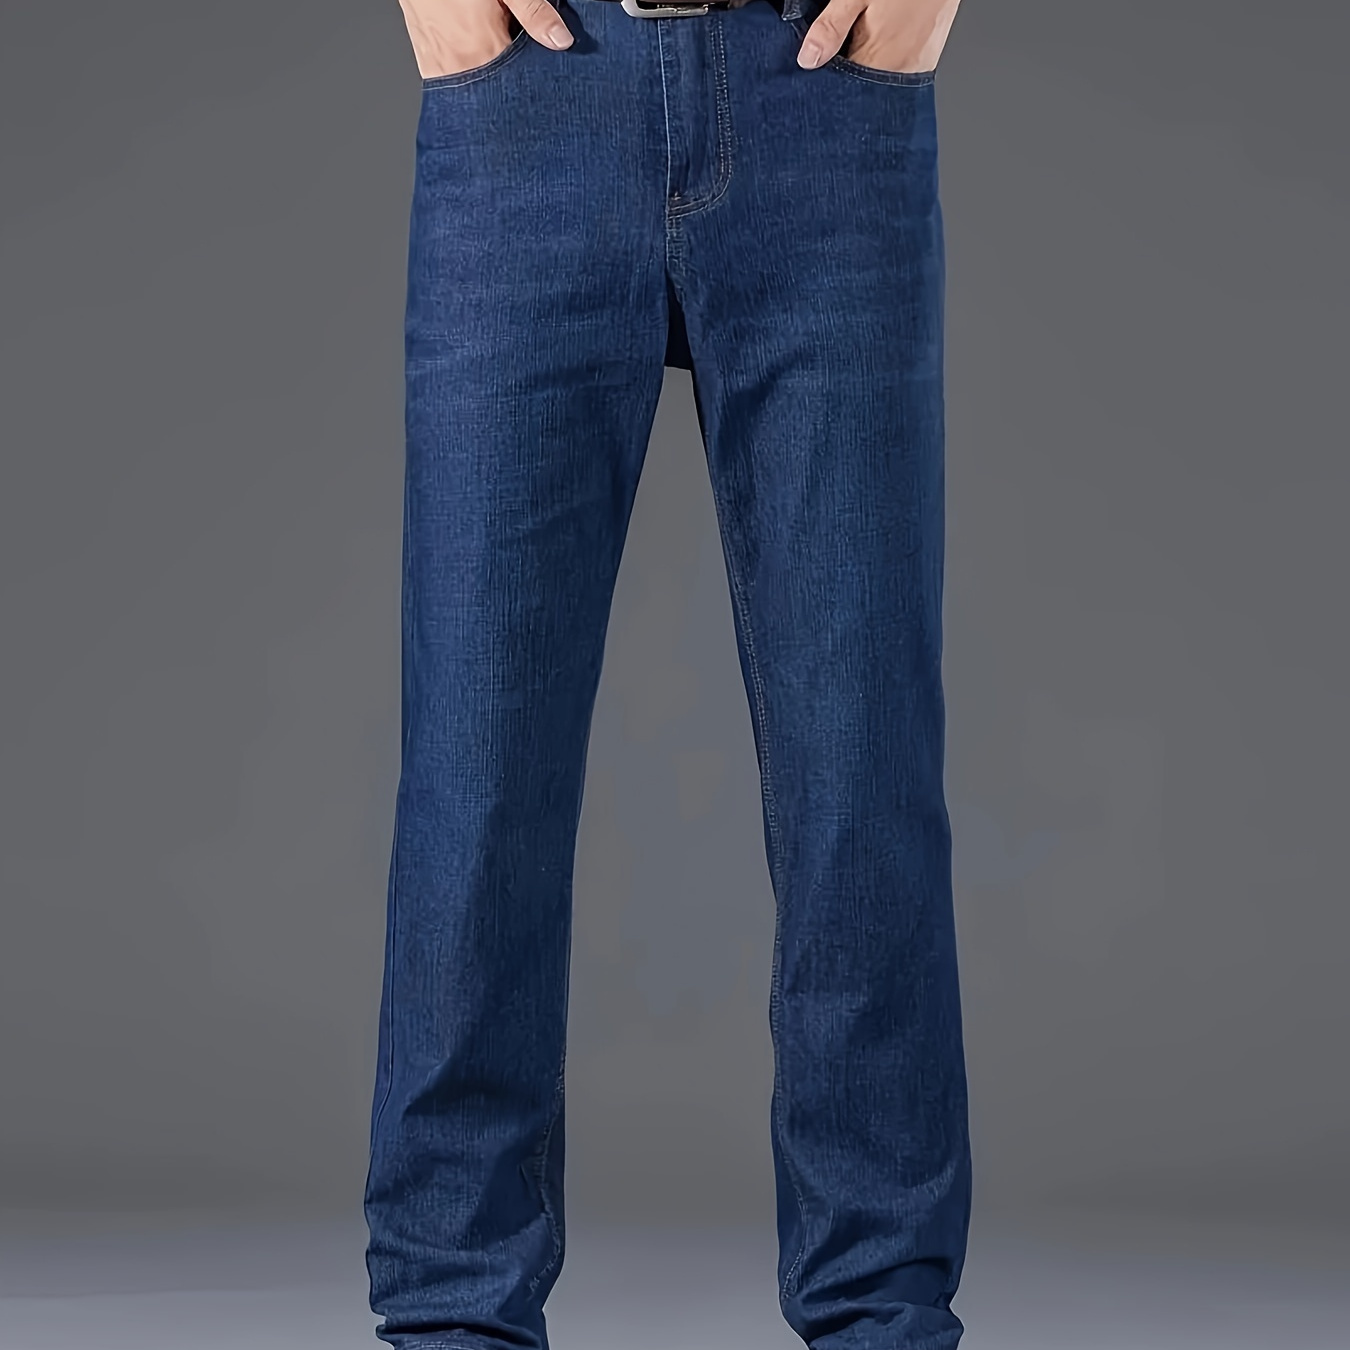 

Men's Thin Fabric Denim Pants, Classic Style Straight Leg Jeans, Casual Business Trousers, Old Money Style